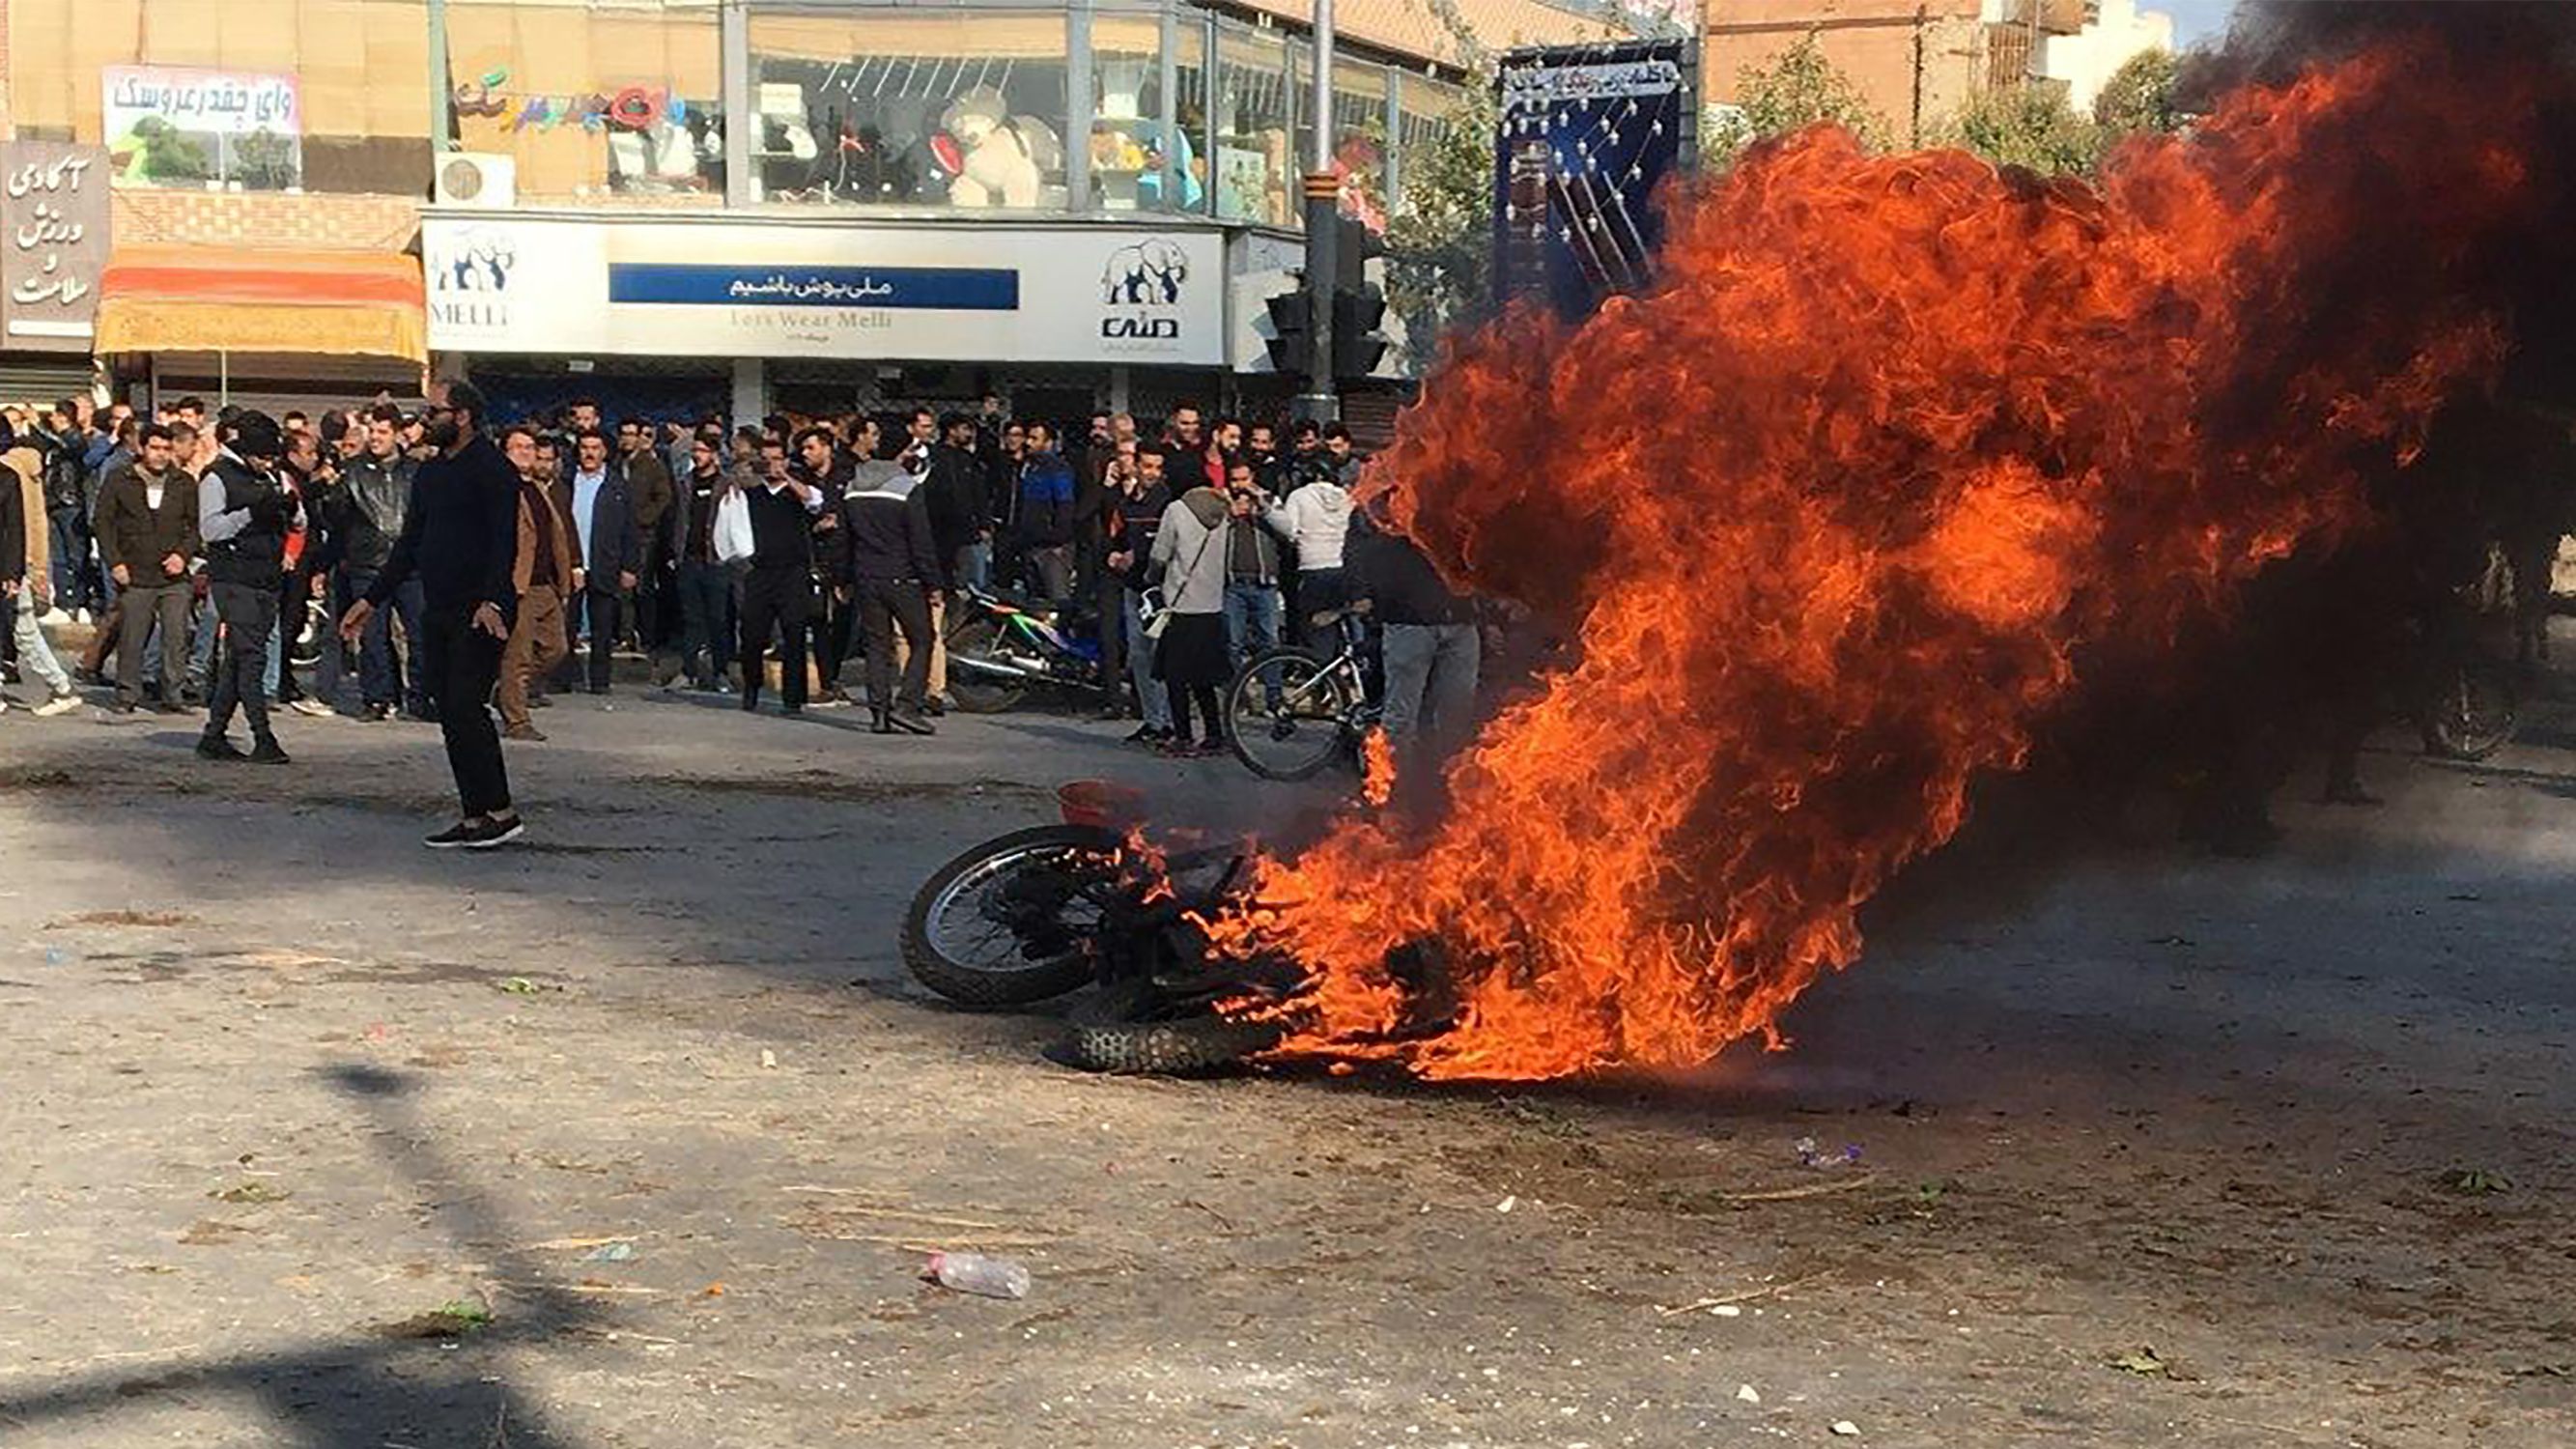 Iranian protesters gather around a burning motorcycle during a demonstration against an increase in gasoline prices in the central city of Isfahan, on November 16, 2019. - One person was killed and others injured in protests across Iran, hours after a surprise decision to increase petrol prices by 50 percent for the first 60 litres and 300 percent for anything above that each month, and impose rationing. Authorities said the move was aimed at helping needy citizens, and expected to generate 300 trillion rials ($2.55 billion) per annum. (Photo by - / AFP)